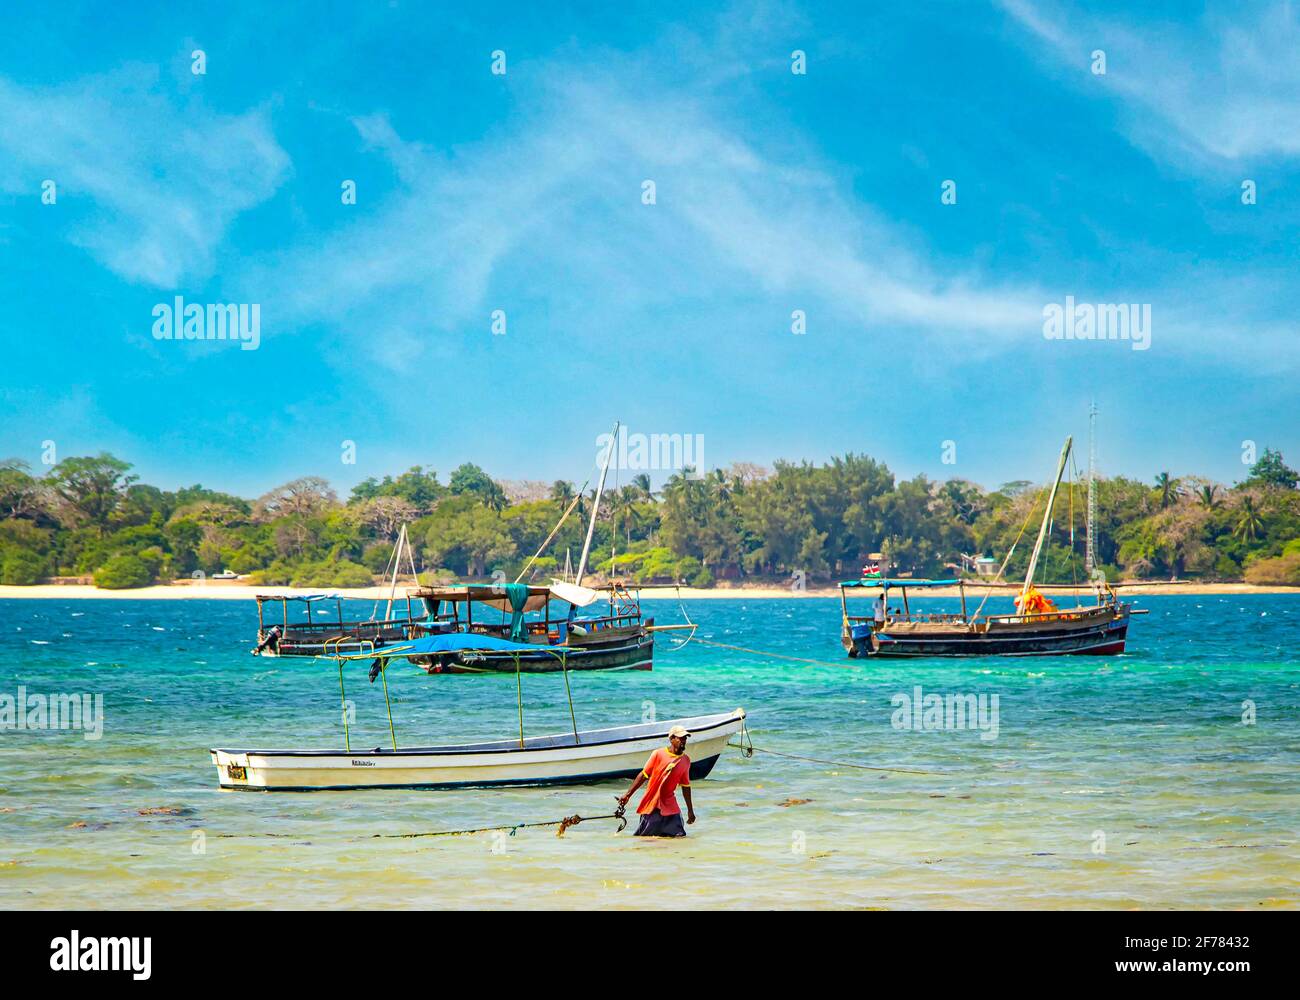 Wasini island, Kenya, AFRICA - February 26, 2020: Landscape view on ships and small boats on the water on wild island. It is the pure blue Indian Stock Photo